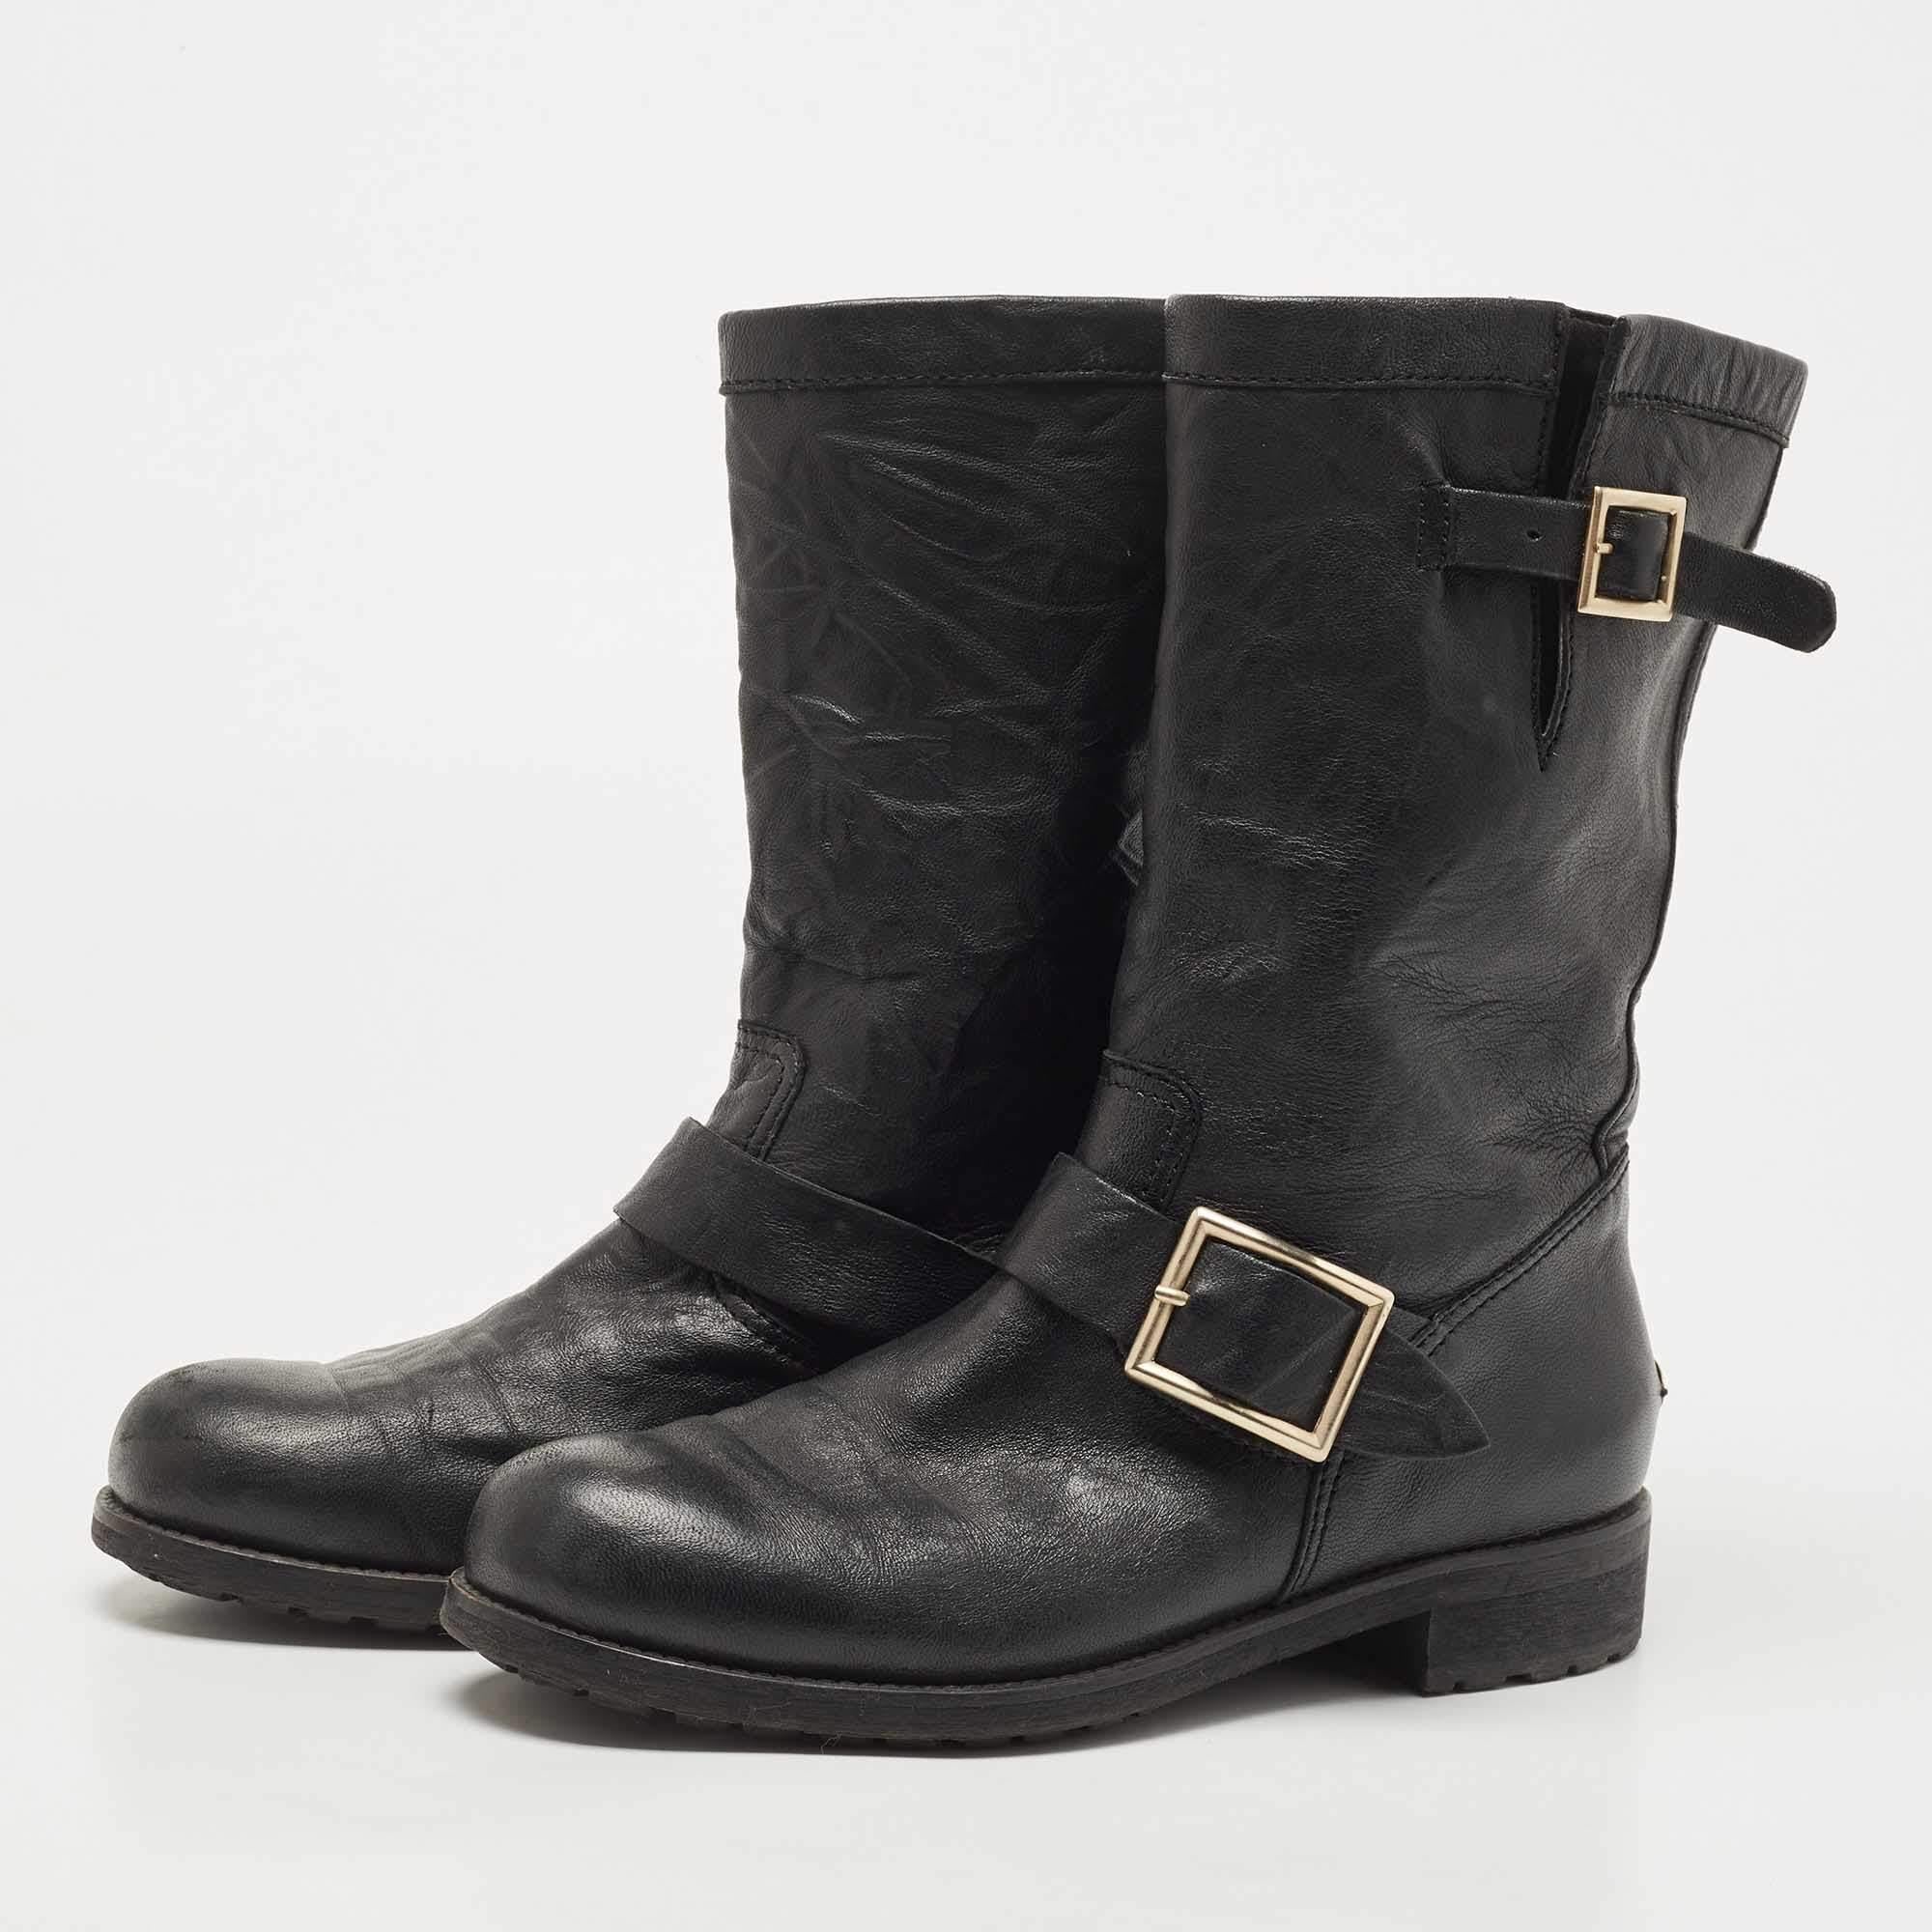 Boots are an essential part of your wardrobe, and these boots, crafted from top-quality materials, are a fine choice. Offering the best of comfort and style, this sturdy-soled pair would be great for a casual day out!

